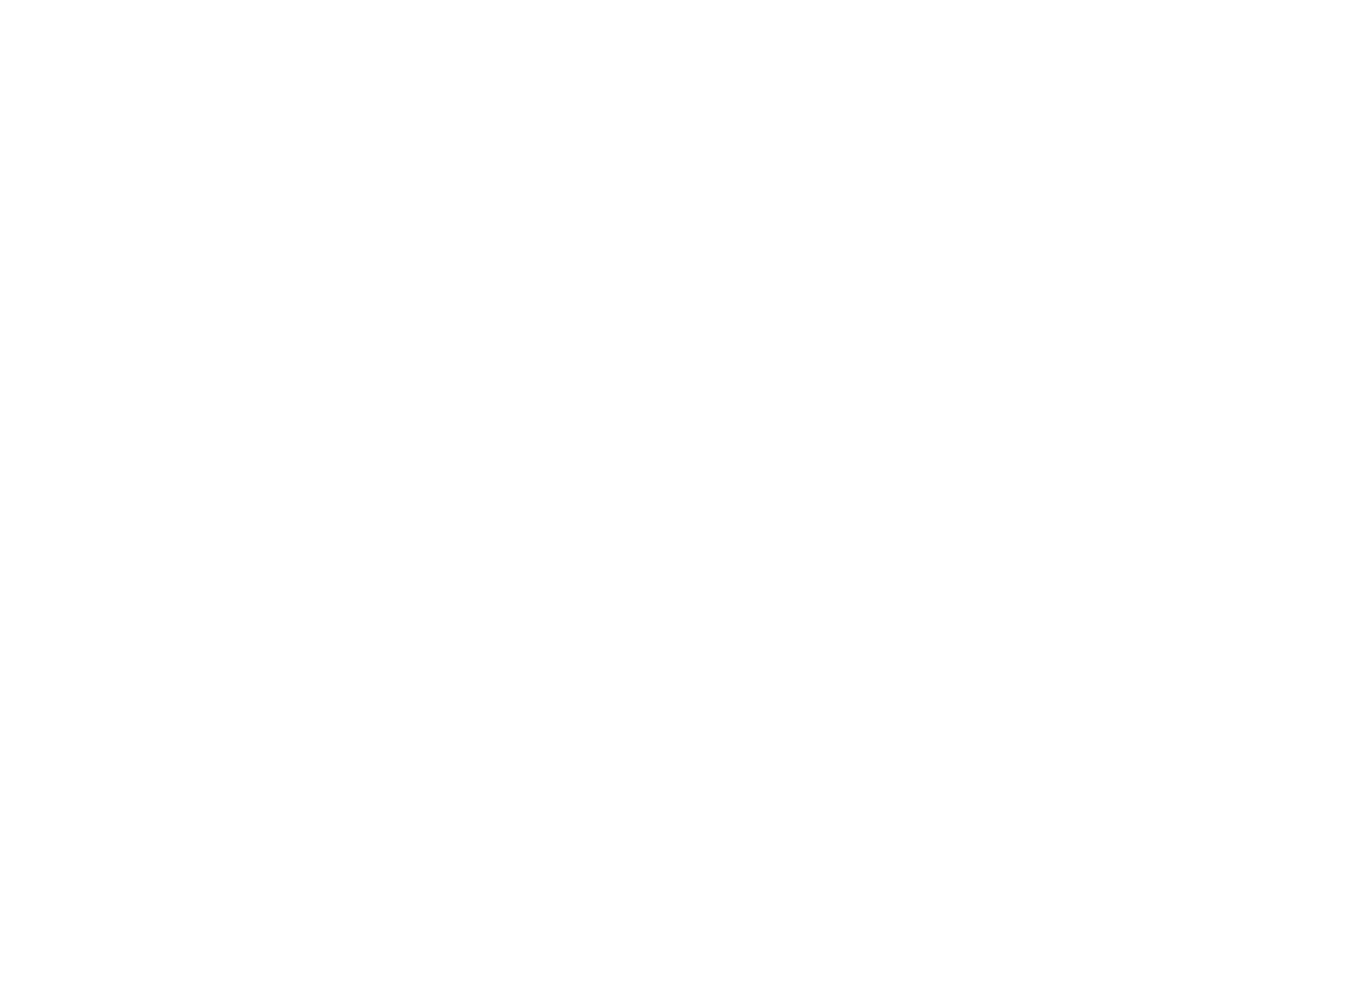 Canopy Cancer Collective